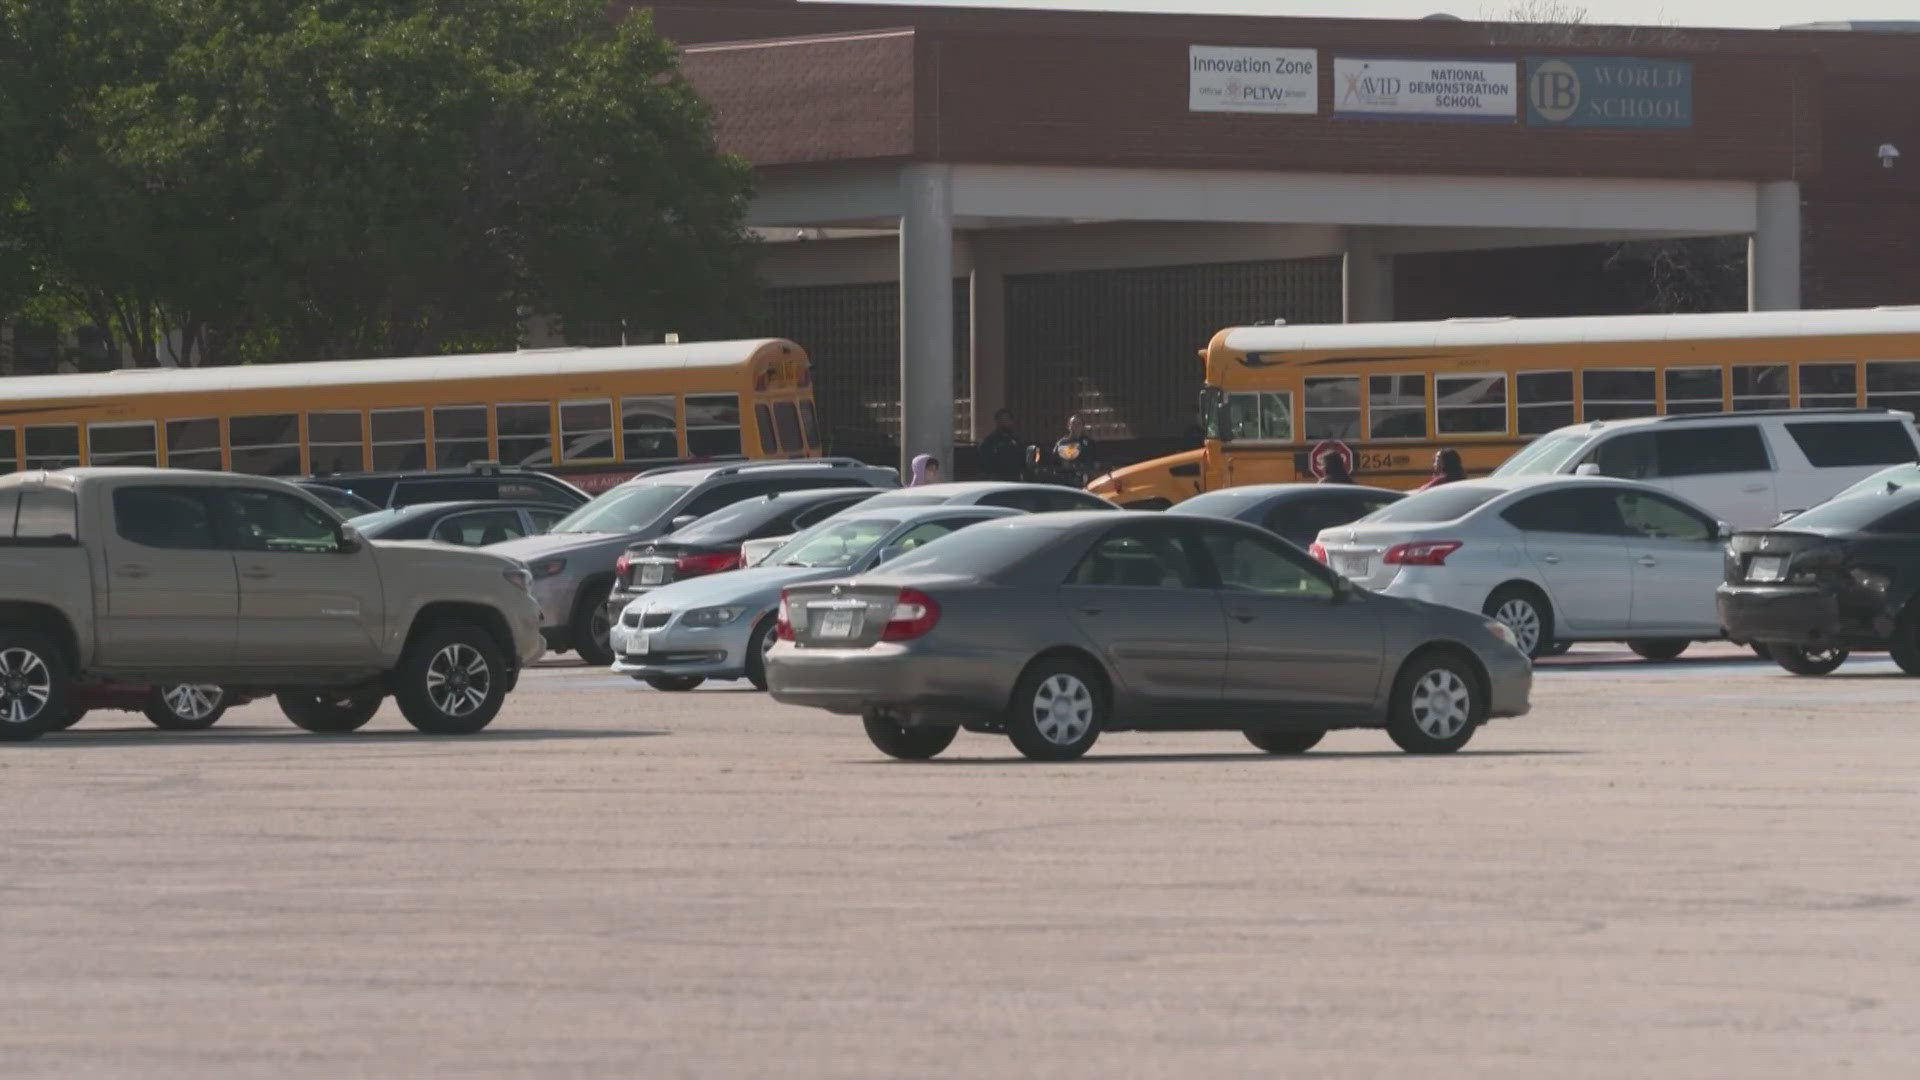 Some Bowie High School teachers have been voicing their concerns about safety at the school.